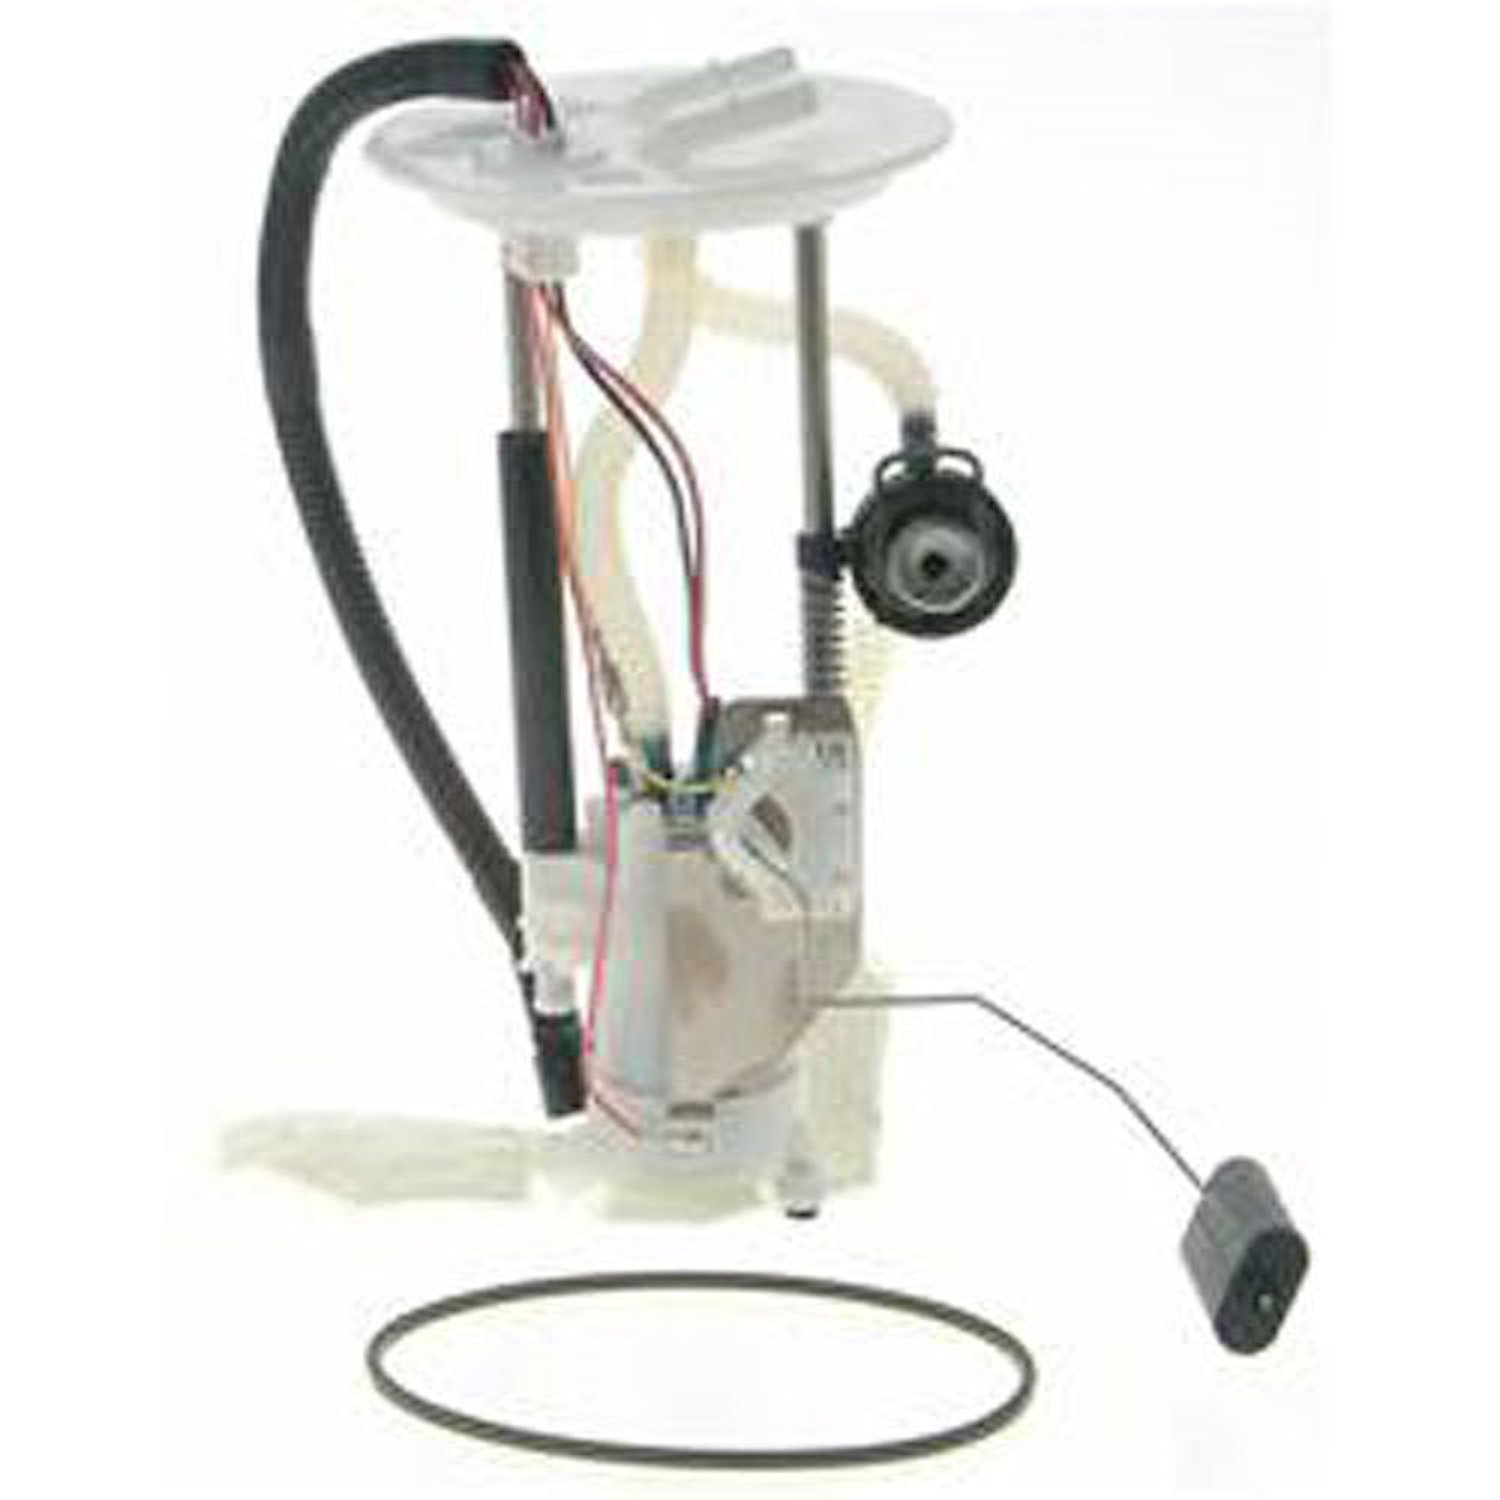 OE Ford Replacement Electric Fuel Pump Module Assembly 2003-04 Ford Expedition 4.6L V8